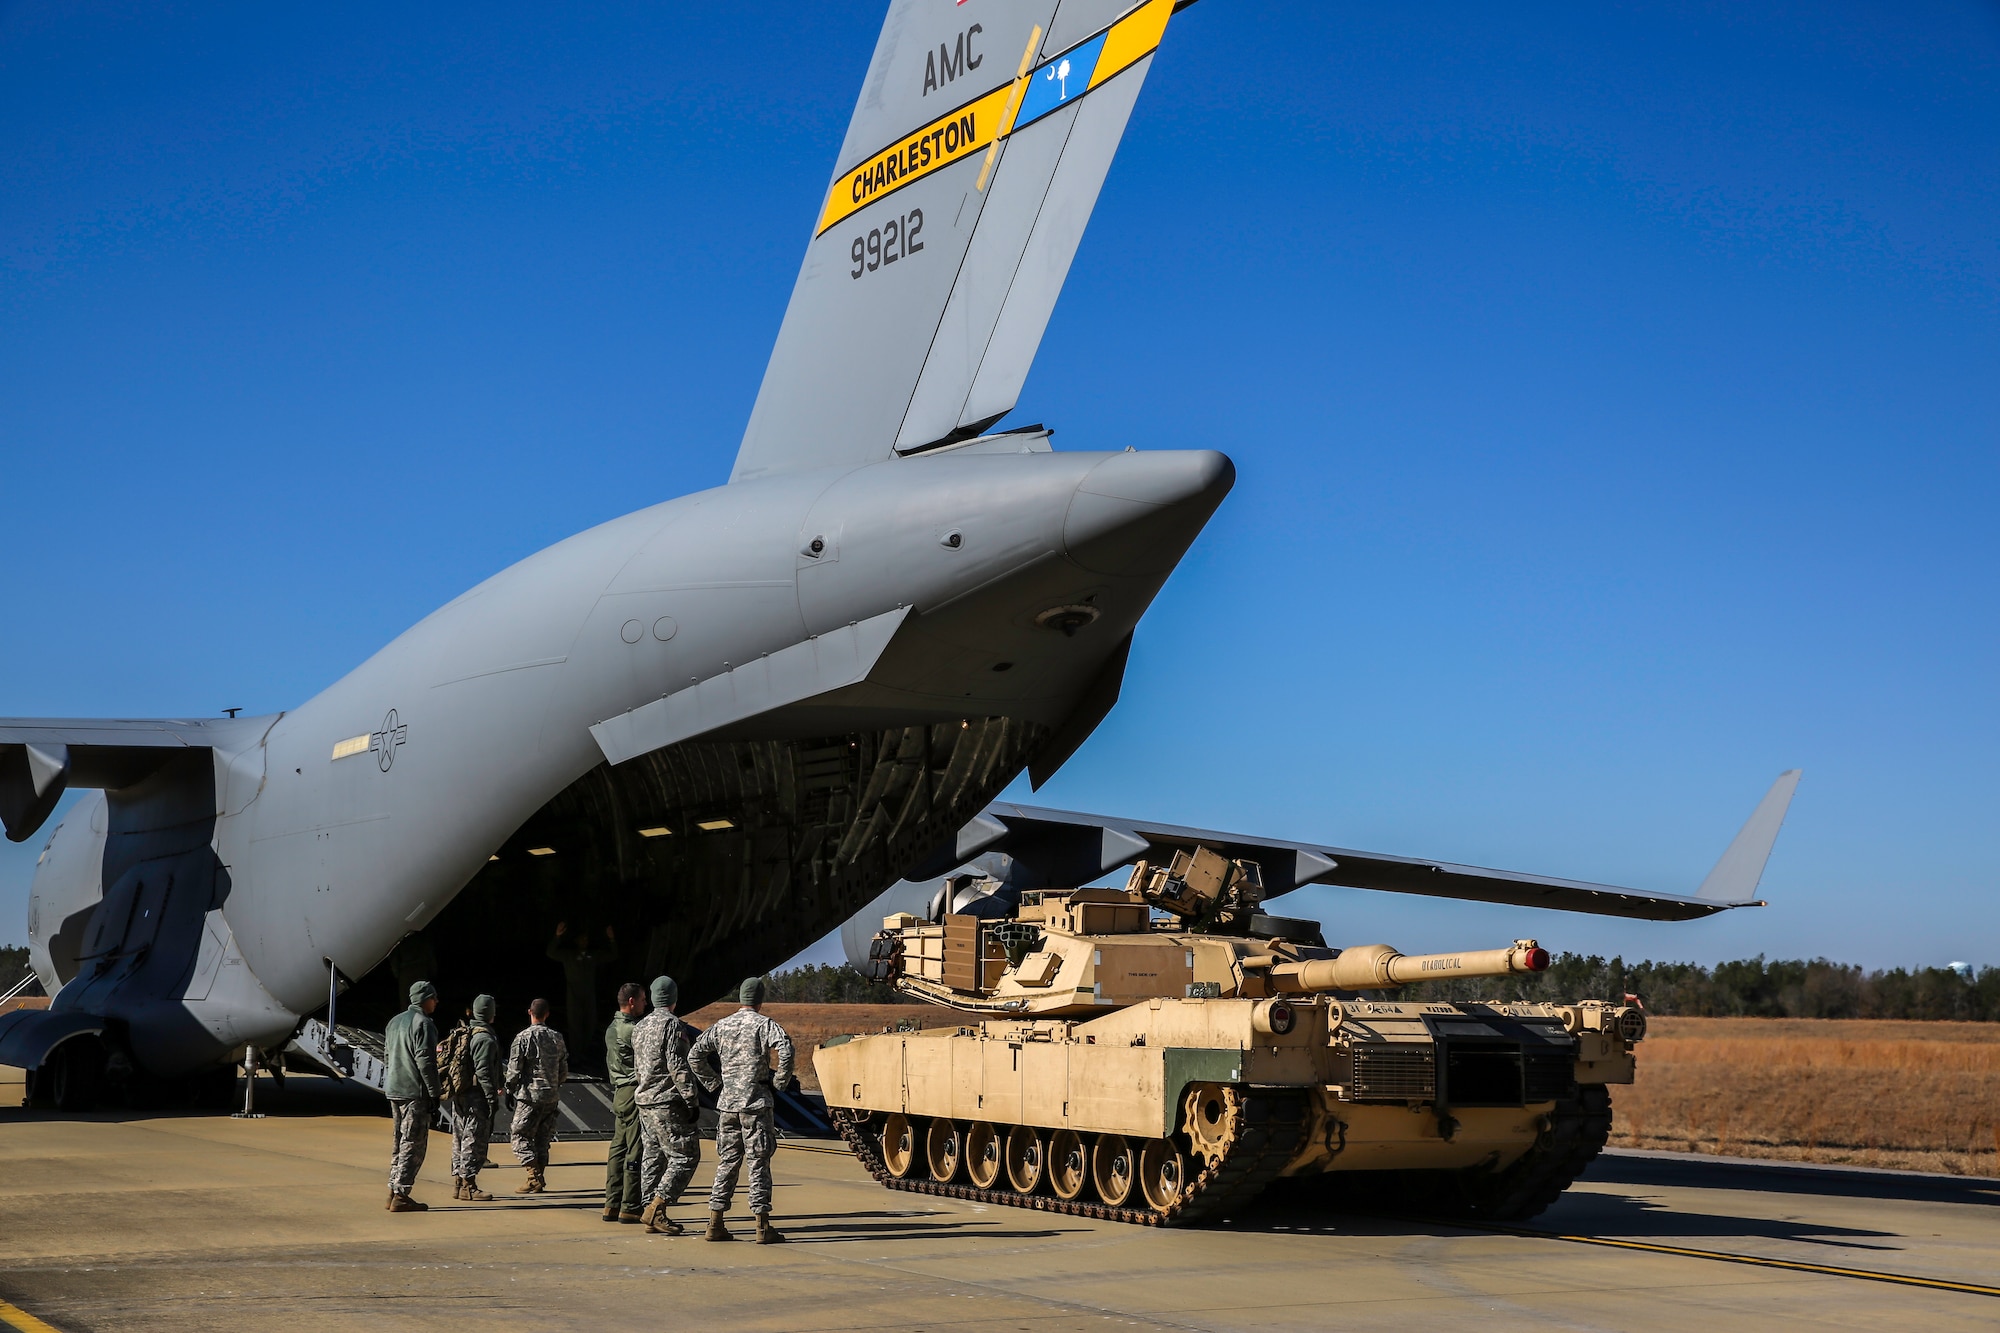 An Abrams M1A2 tank makes its way toward the ramp of a C-17 Globemaster III Dec. 11, 2014 at North Air Force Auxiliary Field in North, S.C. The tank movement was part of a two-day exercise which integrated C-17 air and ground crew training for 315th Airlift Wing Airmen stationed at Joint Base Charleston, S.C. as well as Soldiers from one of the 3rd Infantry Division’s Immediate Ready Companies stationed at Fort Stewart, Ga. Four C-17’s were used during the exercise to deploy and redeploy two Abrams M1A2 tanks, an M88 recovery vehicle and two M2A3 Bradley Fighting Vehicles. (U.S. Air Force photo by Tech. Sgt. Shane Ellis)